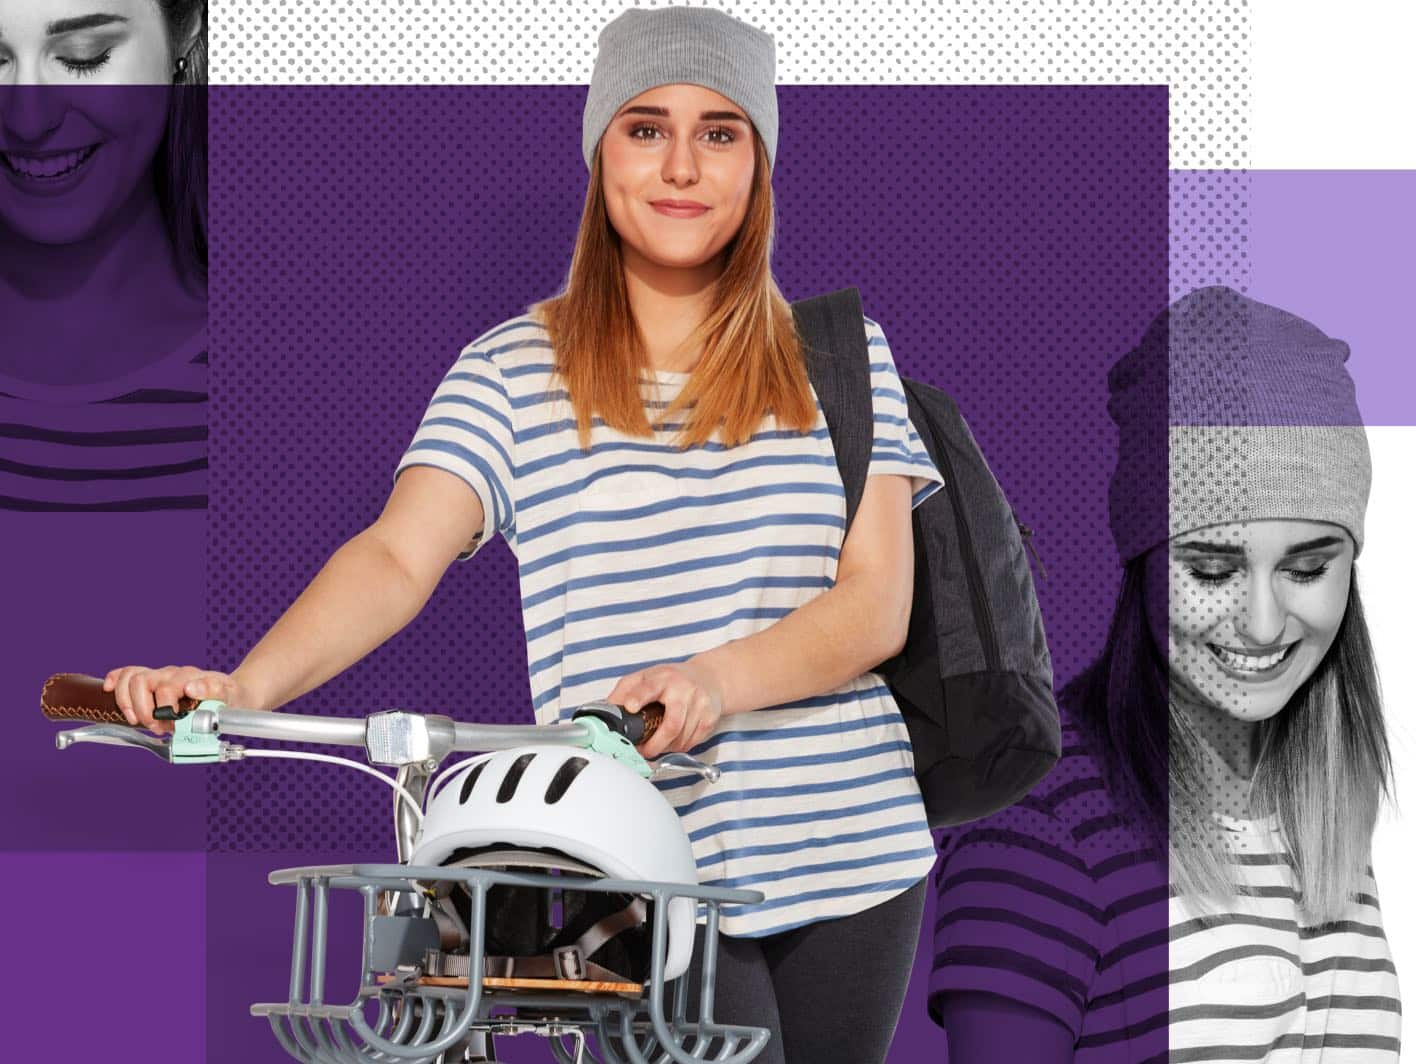 Smiling young woman with her hands on the handlebars of a bicycle, on a purple background